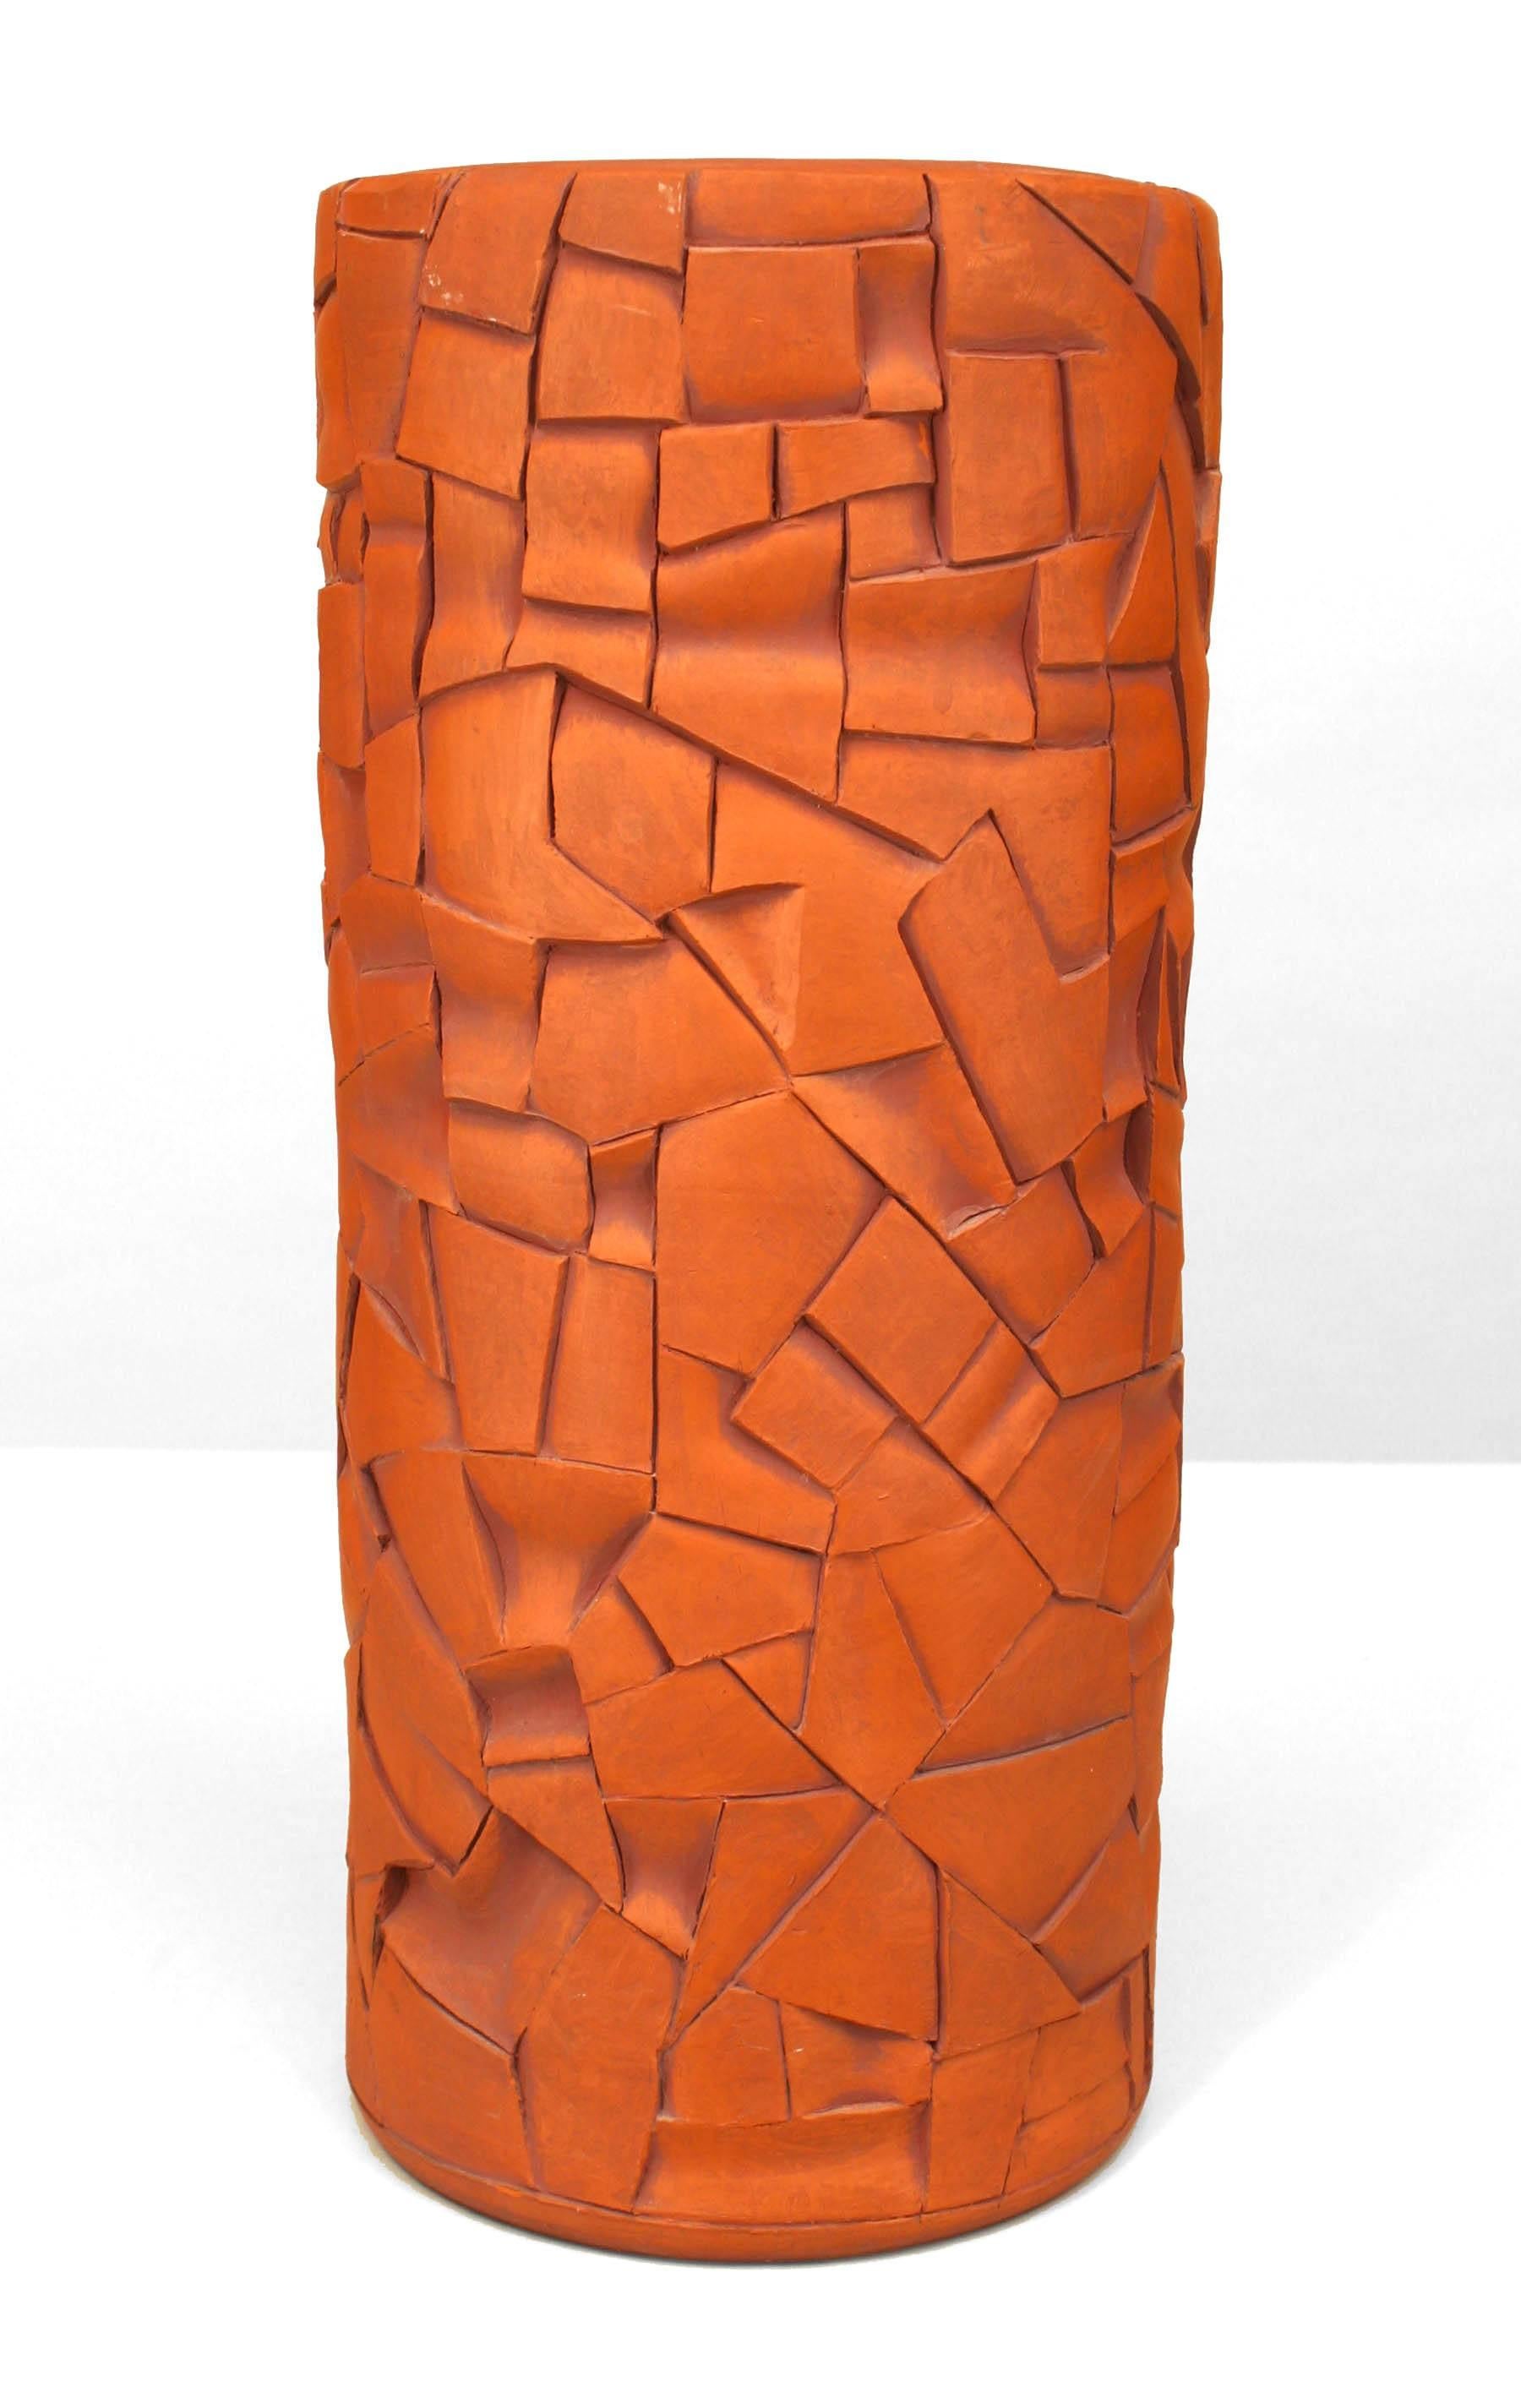 American Post-War Design cylindrical terra-cotta vase with geometric patter of carved relief (by ROBERT BENTLEY)
